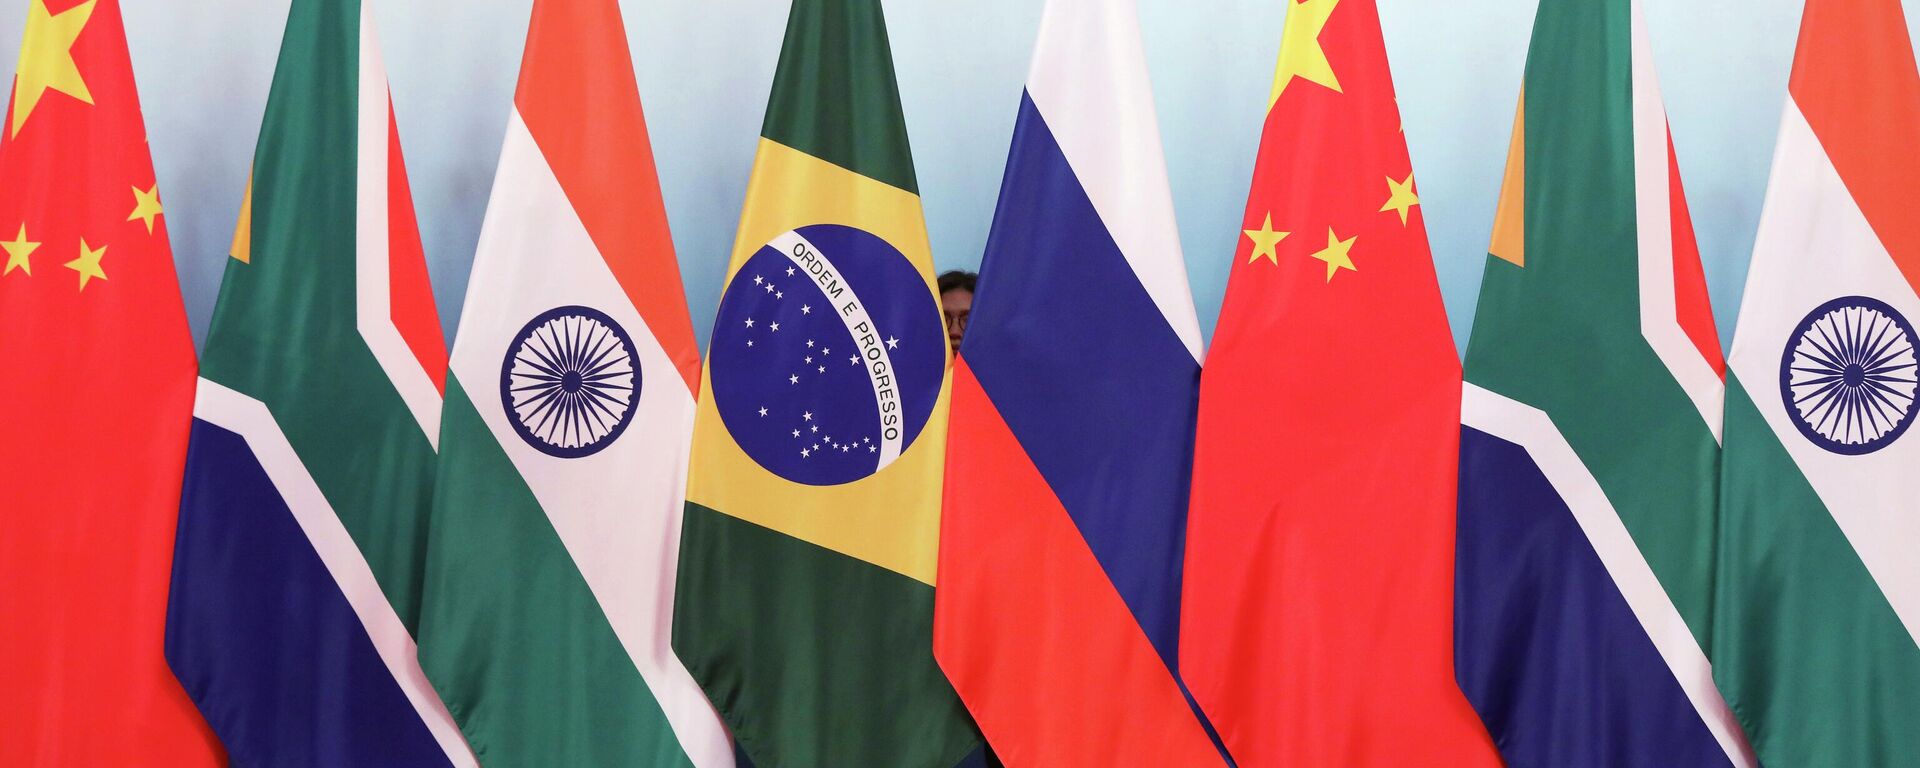 Staff worker stands behind national flags of Brazil, Russia, China, South Africa and India to tidy the flags ahead of a group photo during the BRICS Summit at the Xiamen International Conference and Exhibition Center in Xiamen, southeastern China's Fujian Province, Monday, Sept. 4, 2017. - Sputnik International, 1920, 23.07.2023